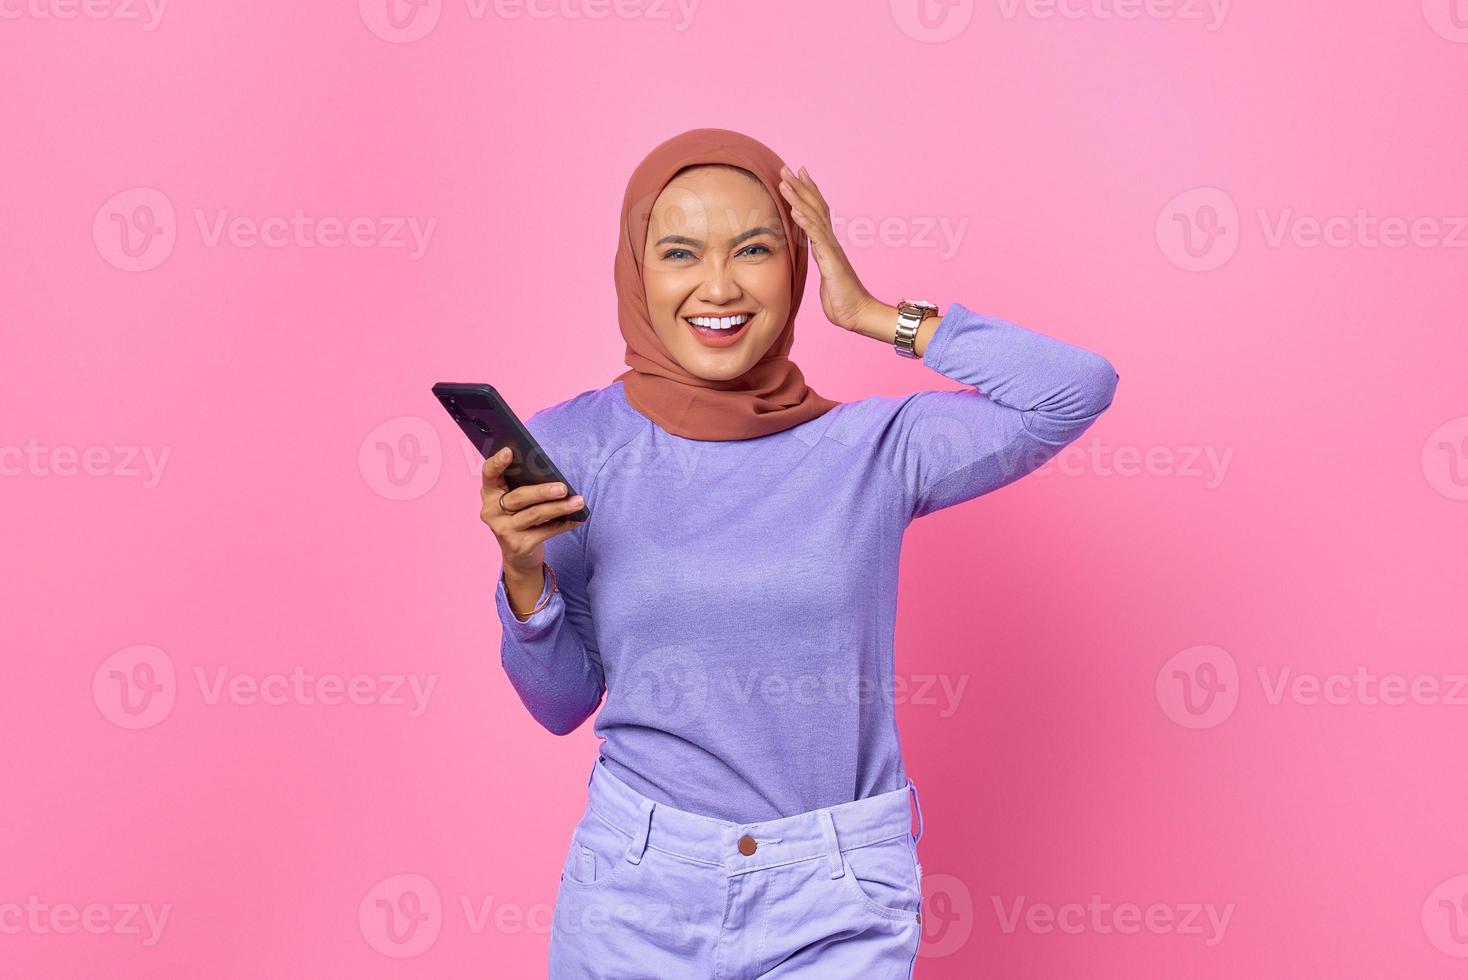 Portrait of smiling young Asian woman holding mobile phone on pink background photo